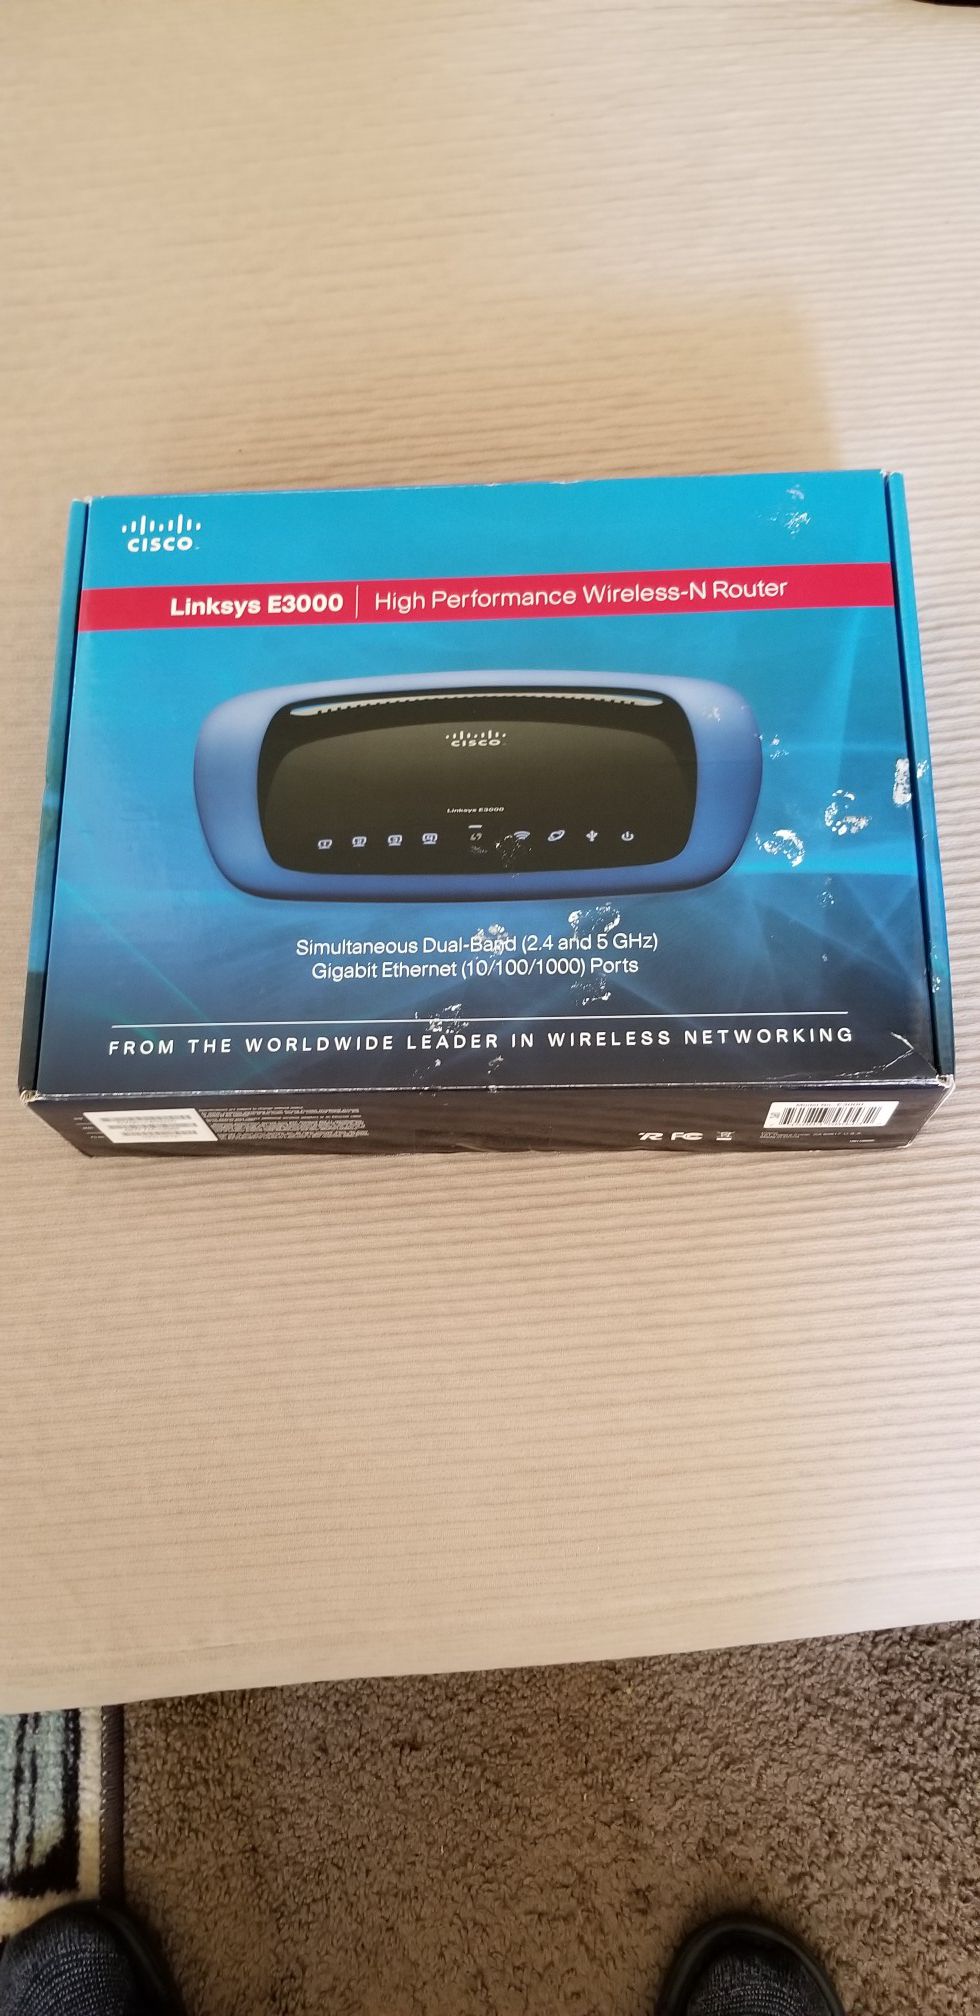 Linksys E3000 High Performance Wireless-N Router